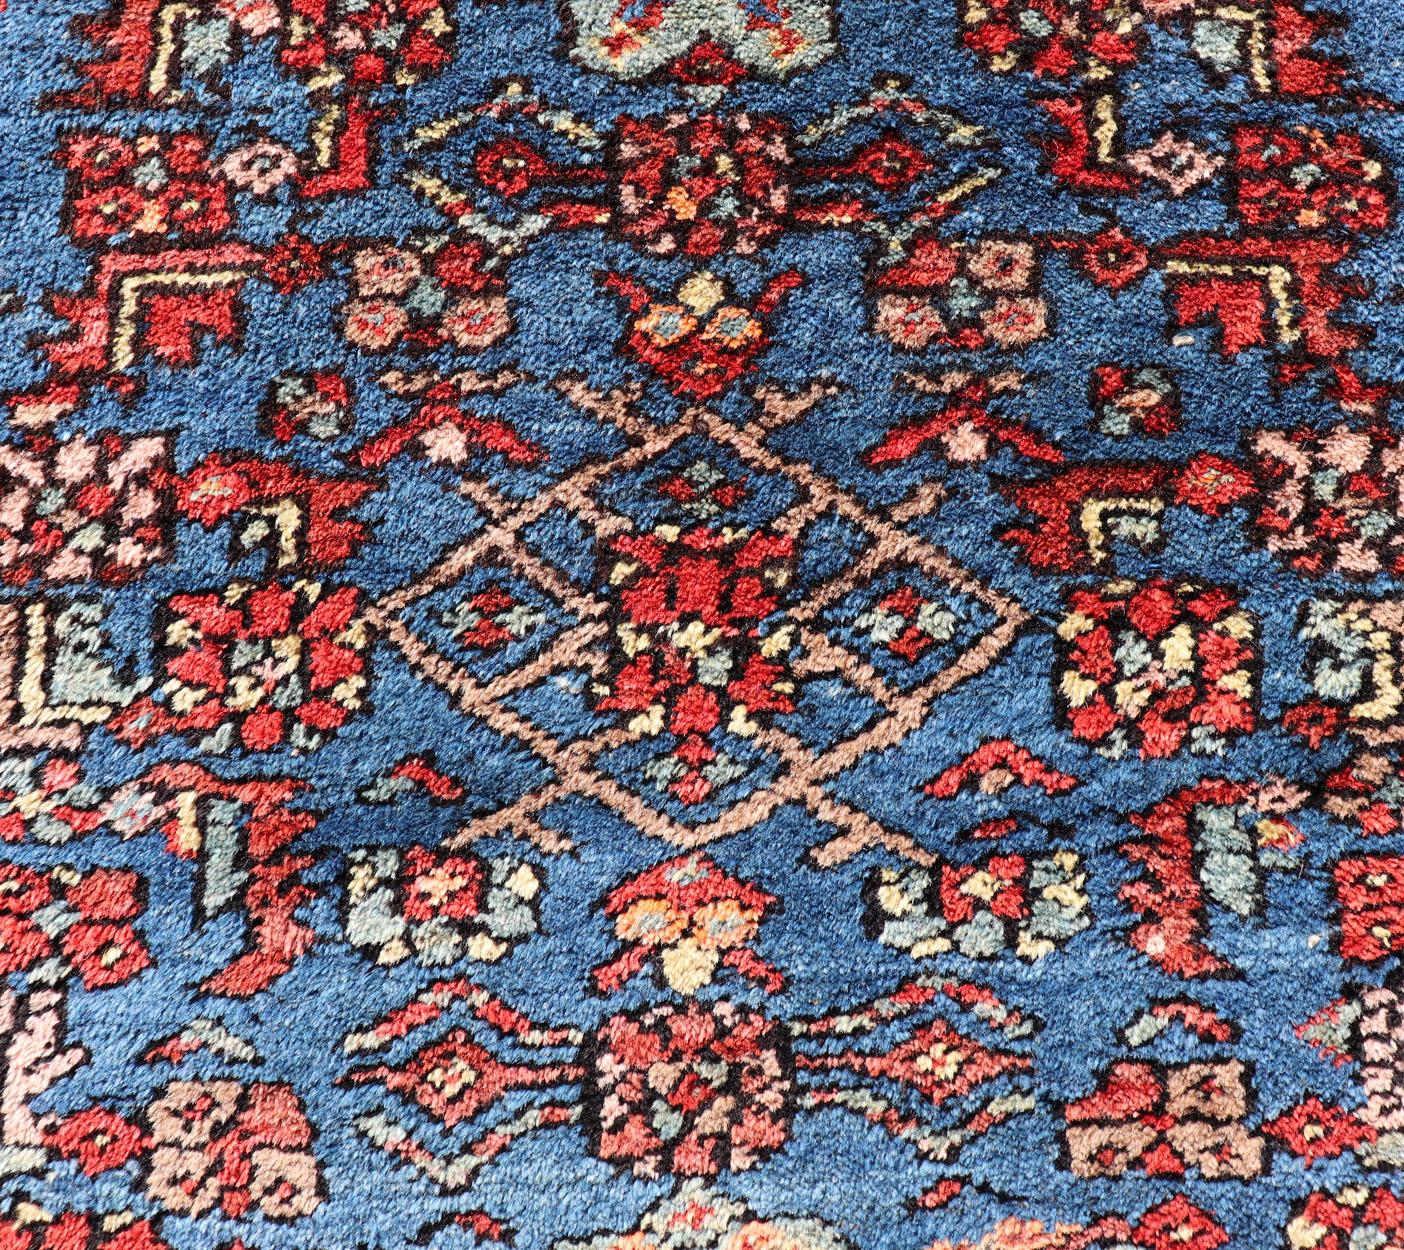 Antique Persian Bidjar Carpet with Variety of Blue Colors, Red, and Salmon For Sale 7